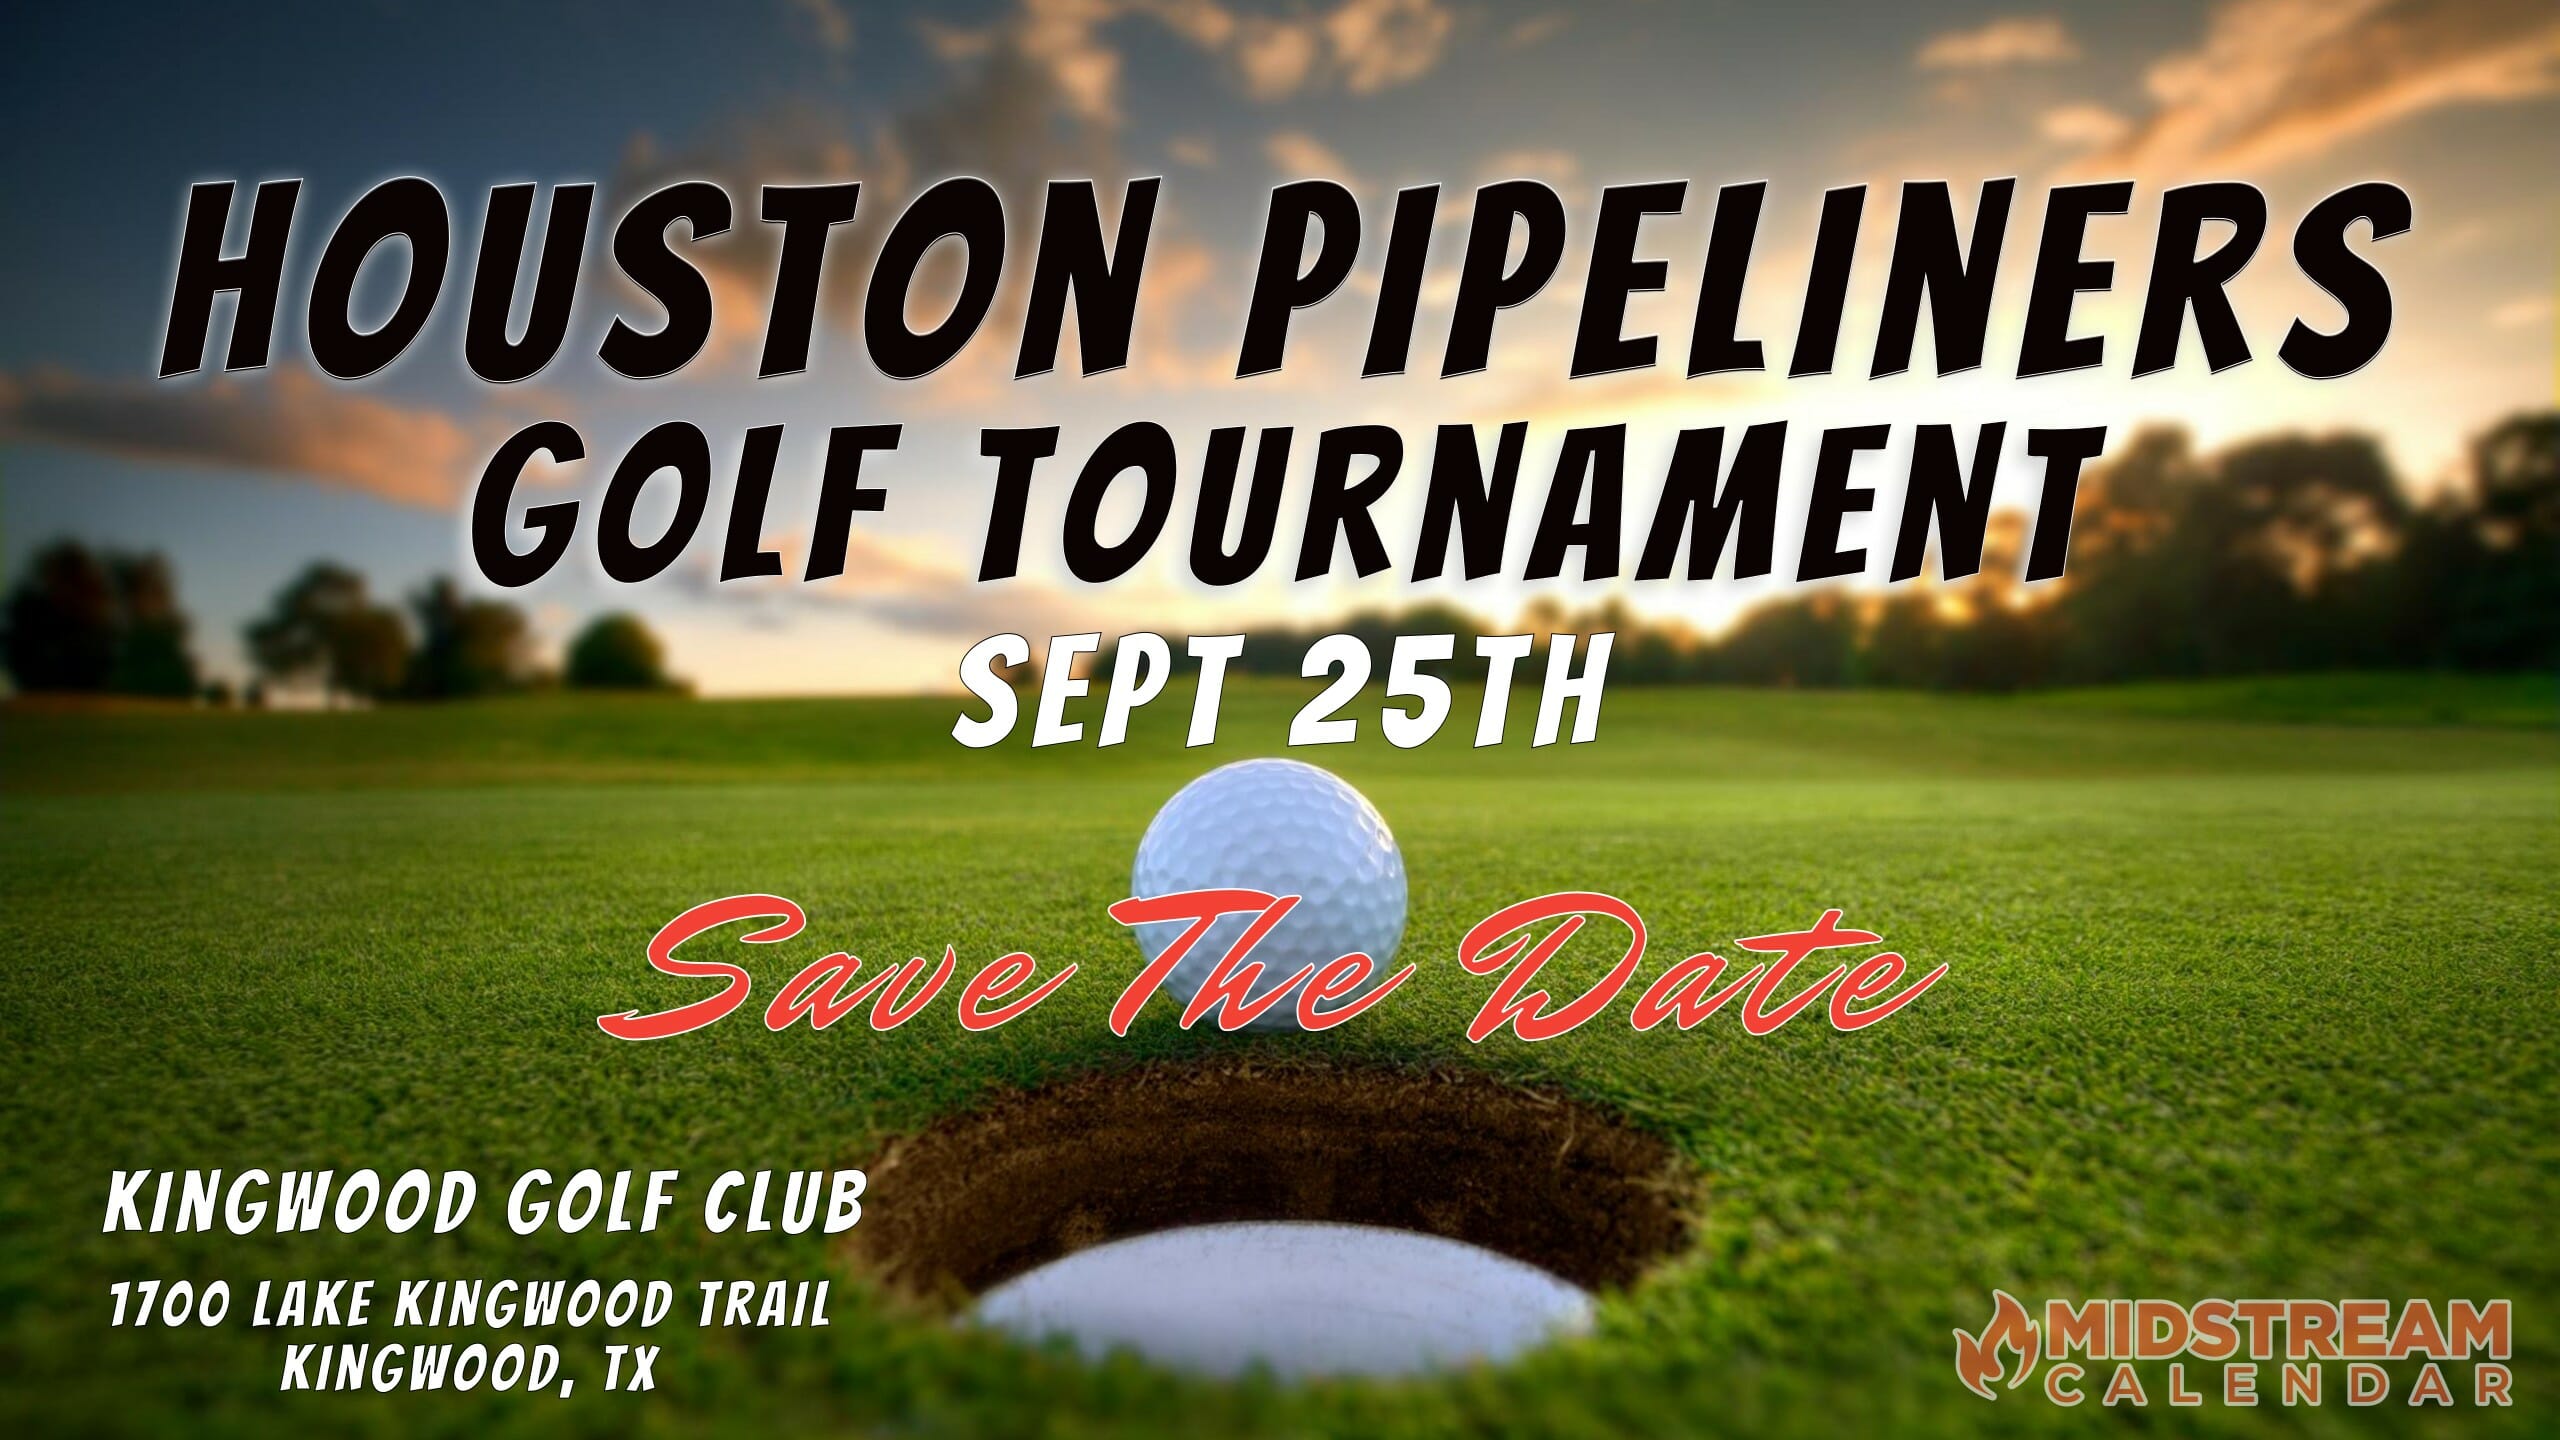 SAVE THE DATE Houston Pipeliners Fall Golf Tournament Sept 25, 2023